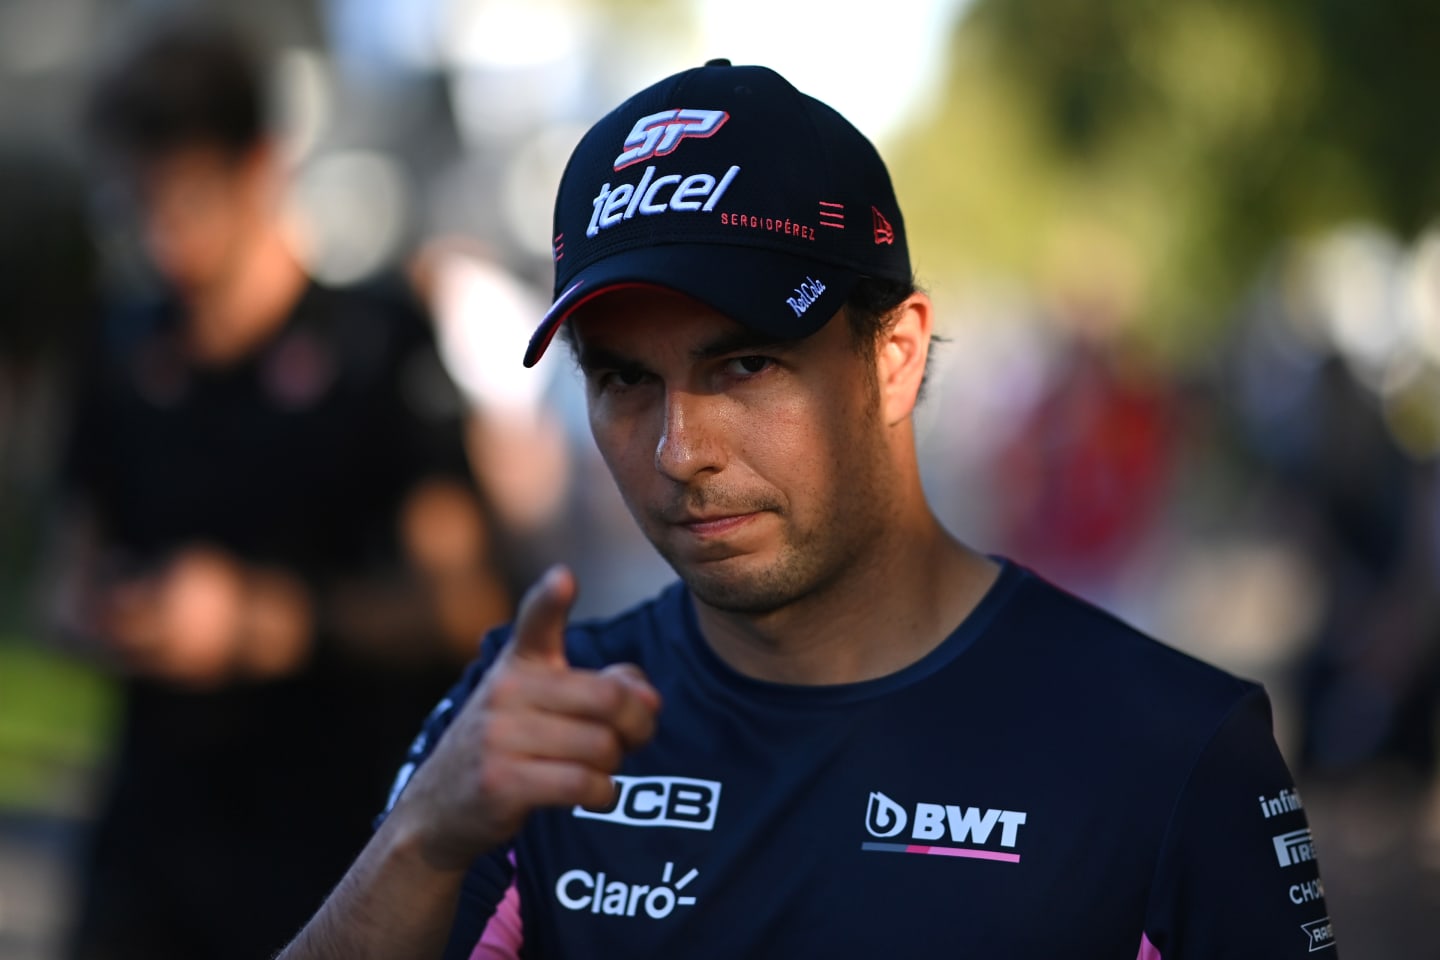 MELBOURNE, AUSTRALIA - MARCH 12: Sergio Perez of Mexico and Racing Point walks in the paddock